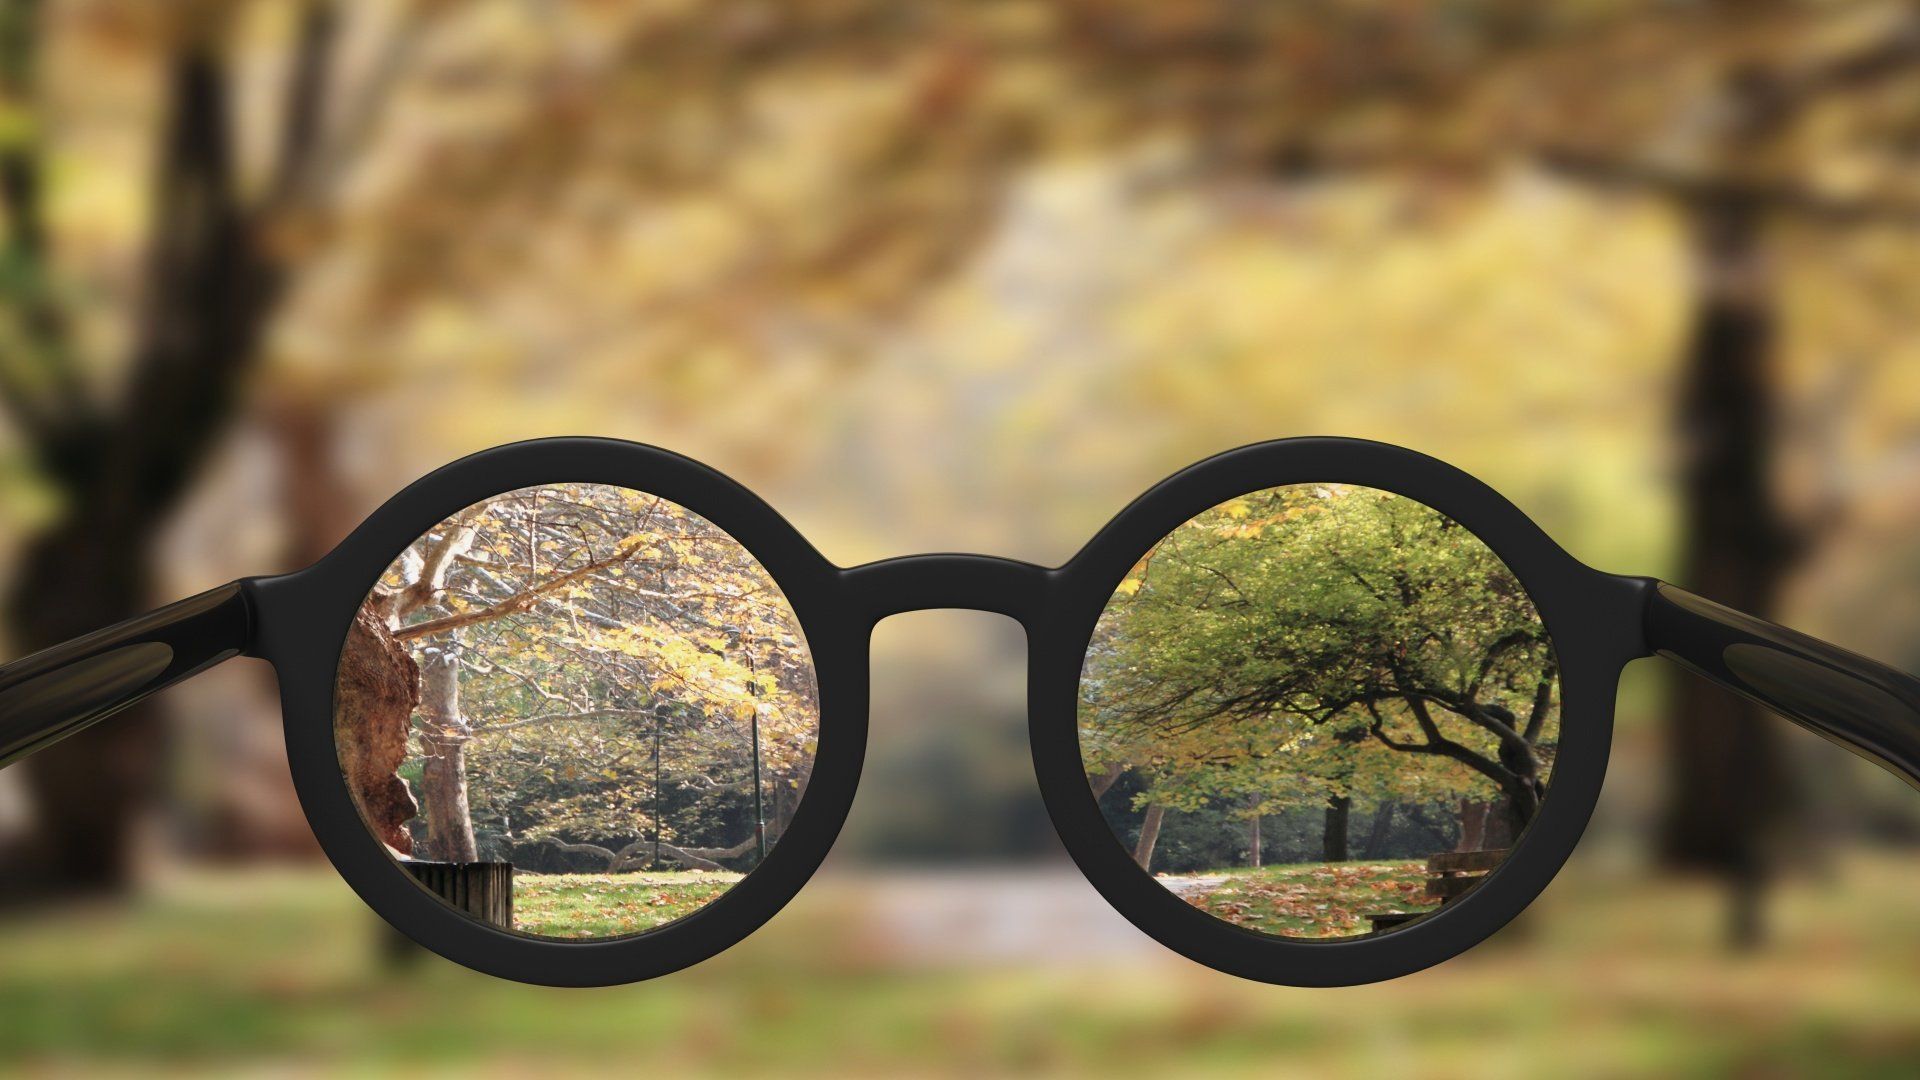 Glasses demonstrating how nearsightedness affects vision with and without vision correction